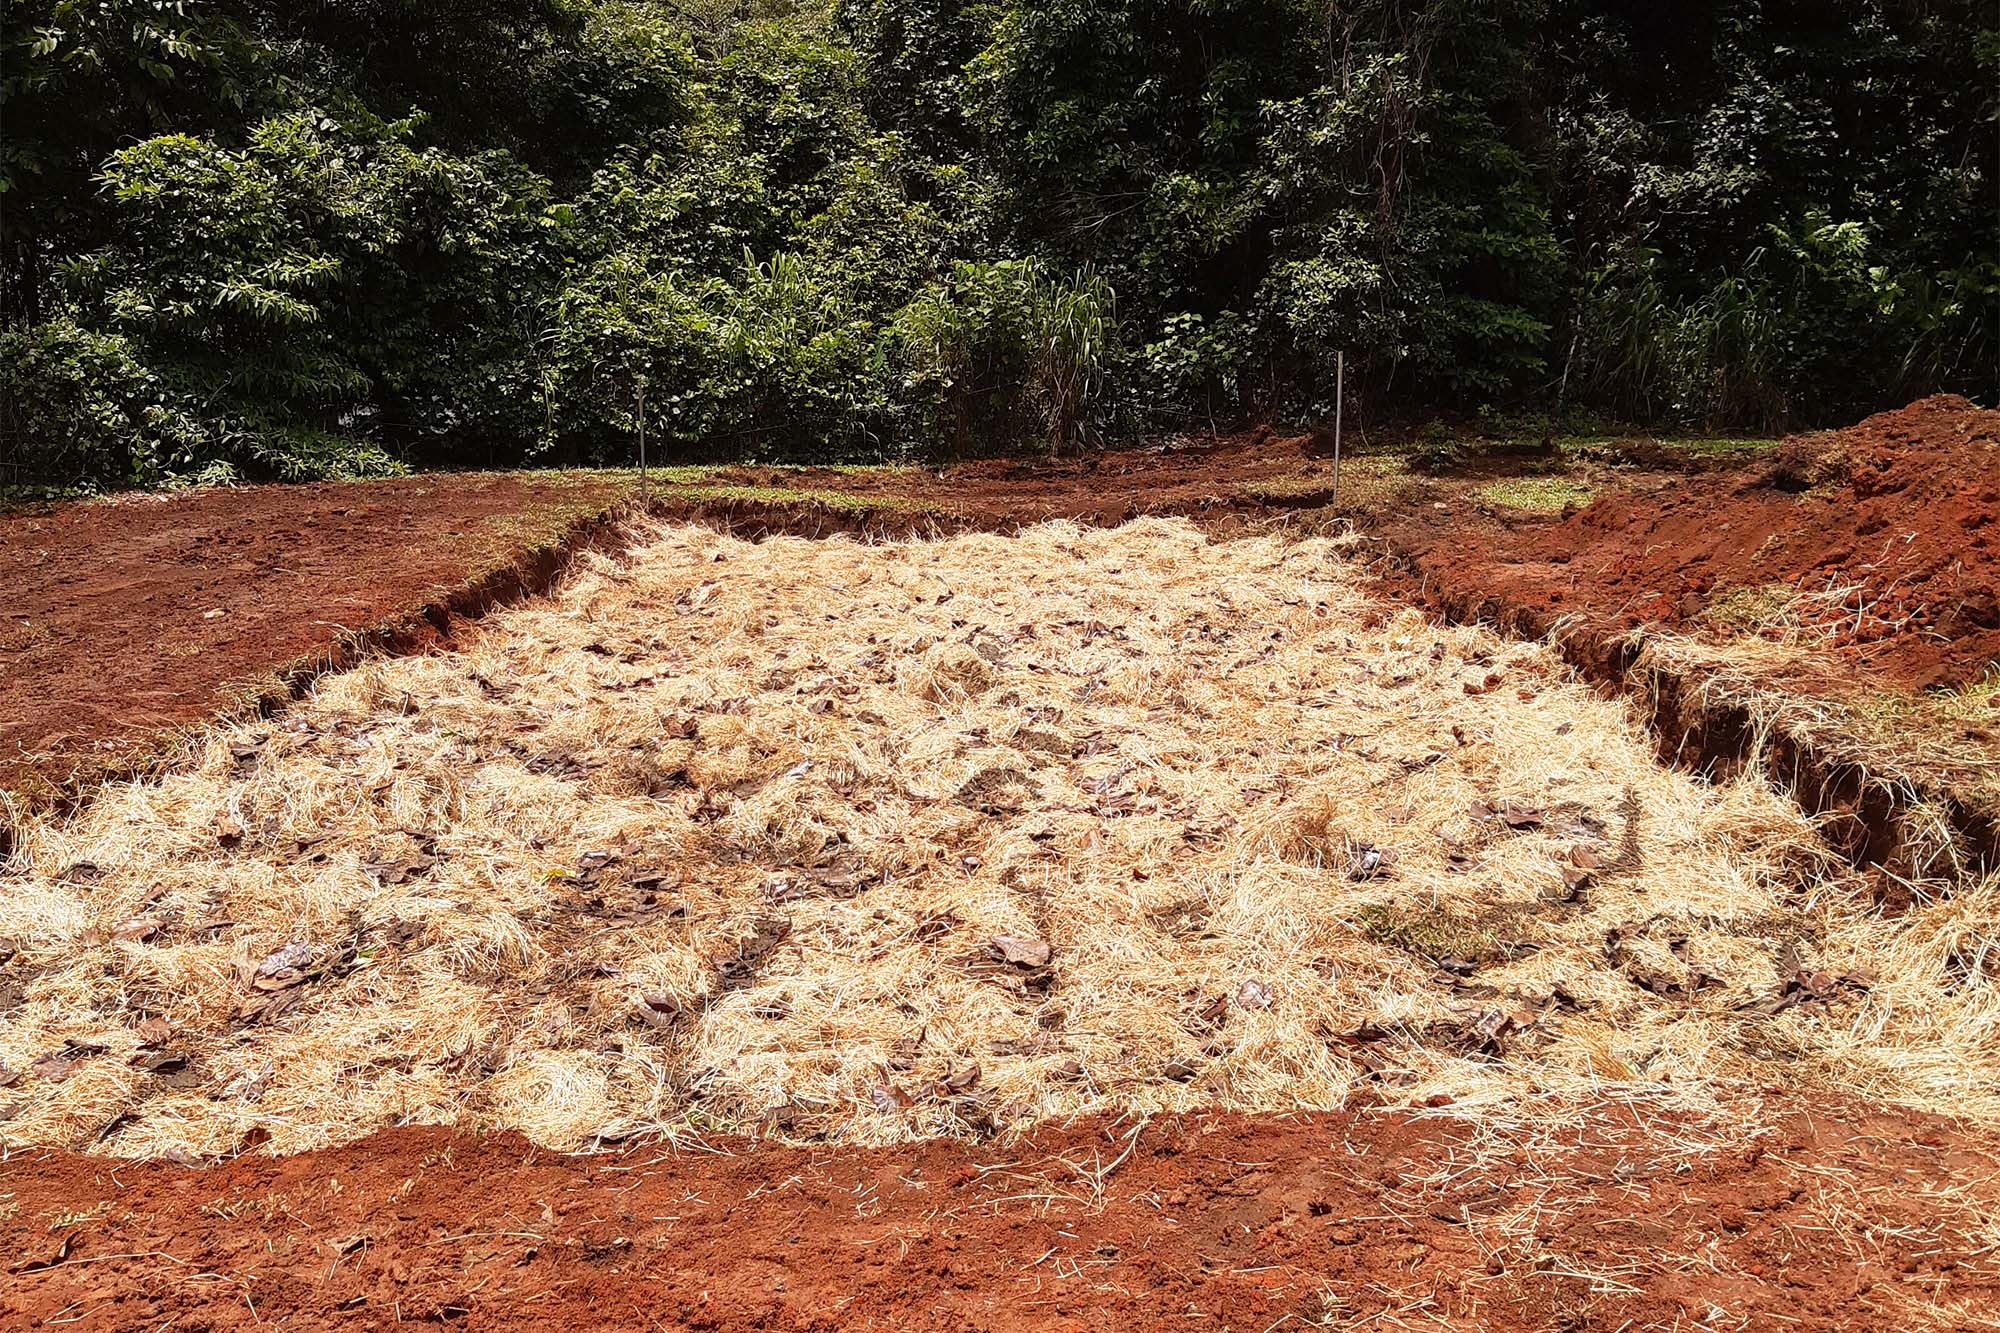 Background: forest. Foreground: amidst red soil, an area has been dug out and filled with loose organic matter.